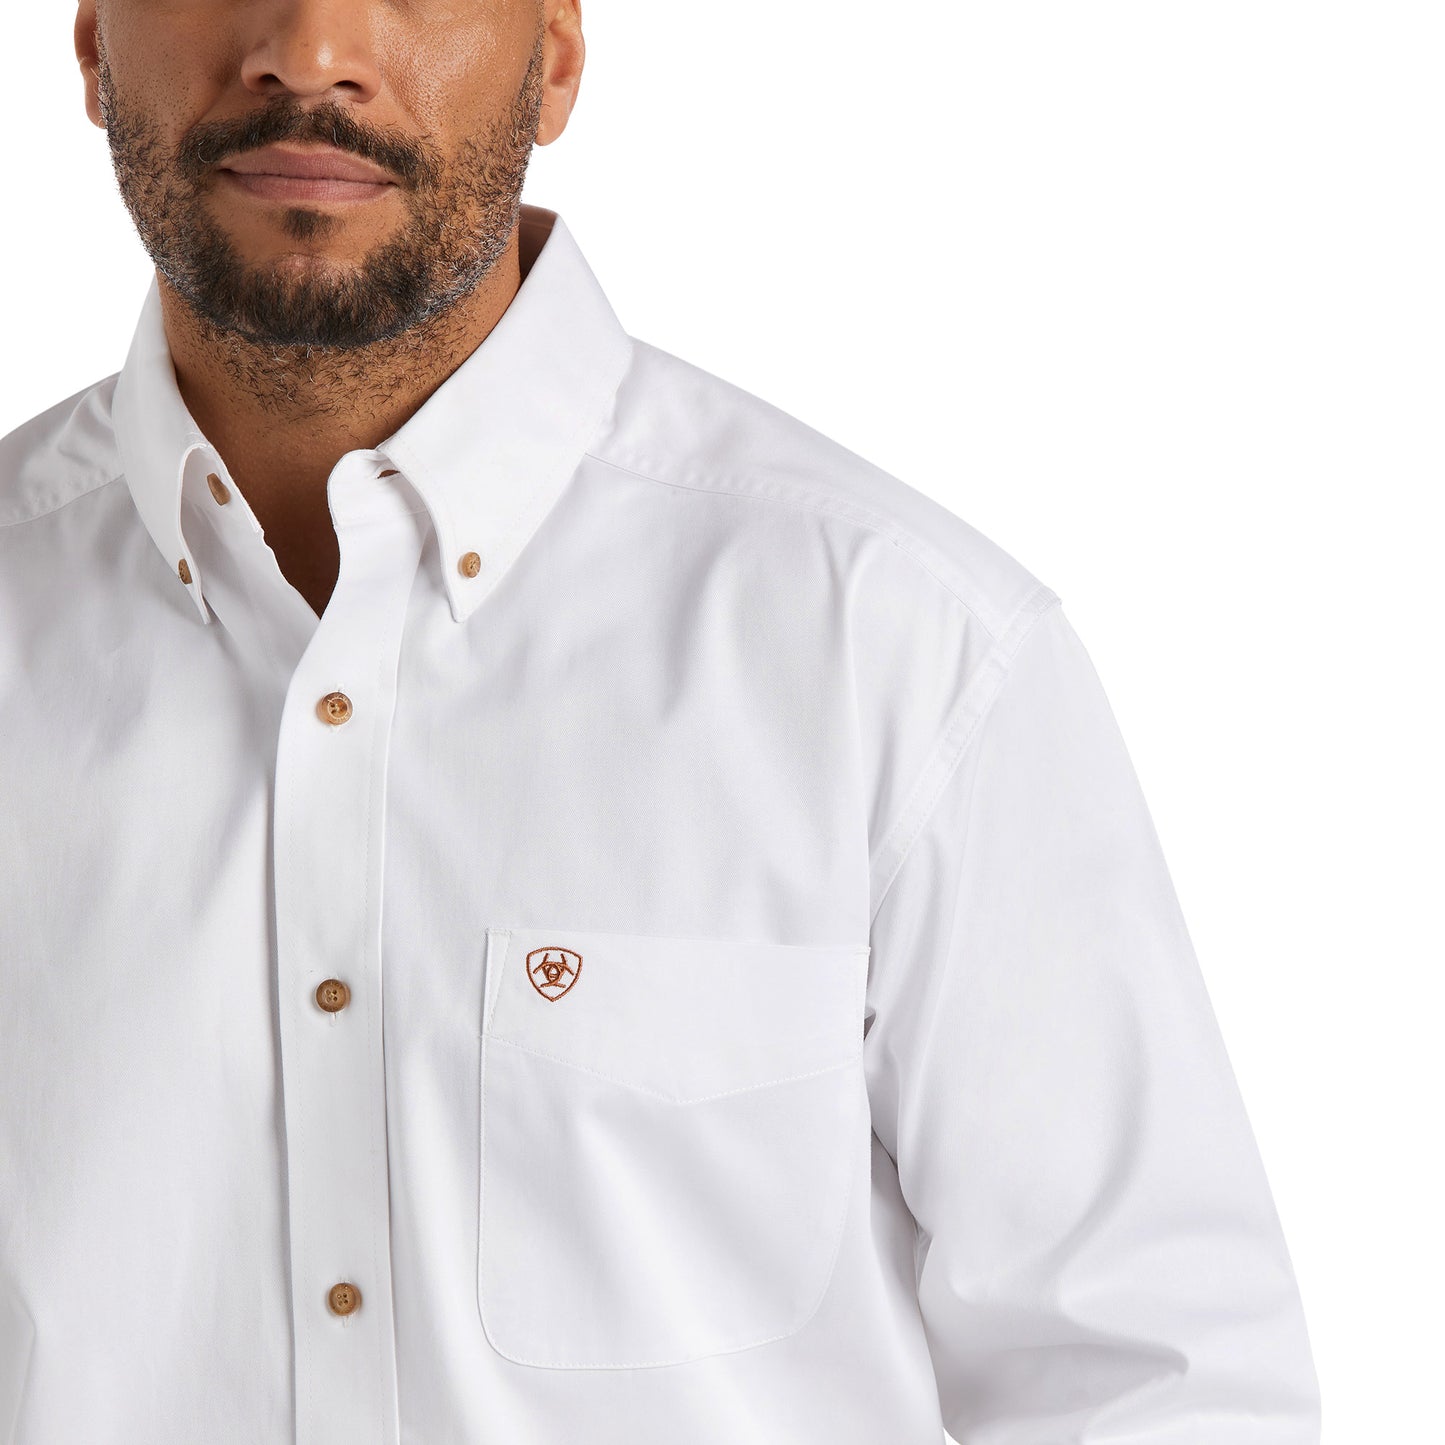 Ariat® Men's Solid Twill White Long Sleeve Button Shirt 10000503